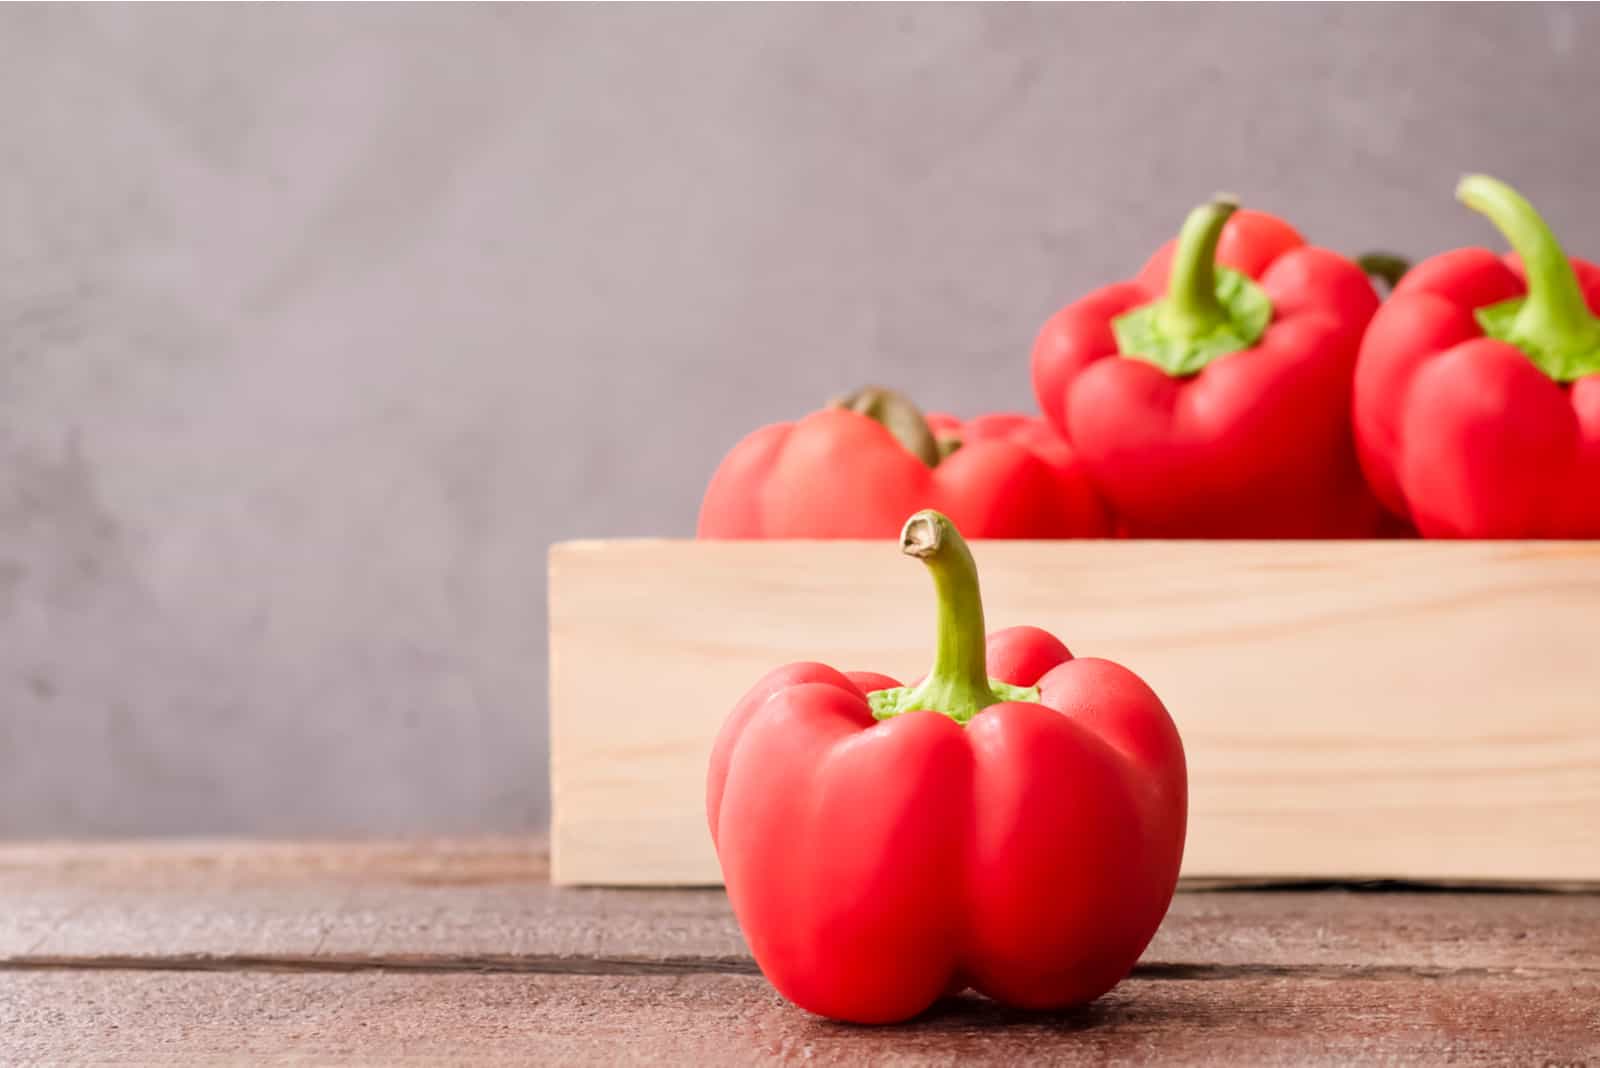 red bell peppers in a wooden box on the table